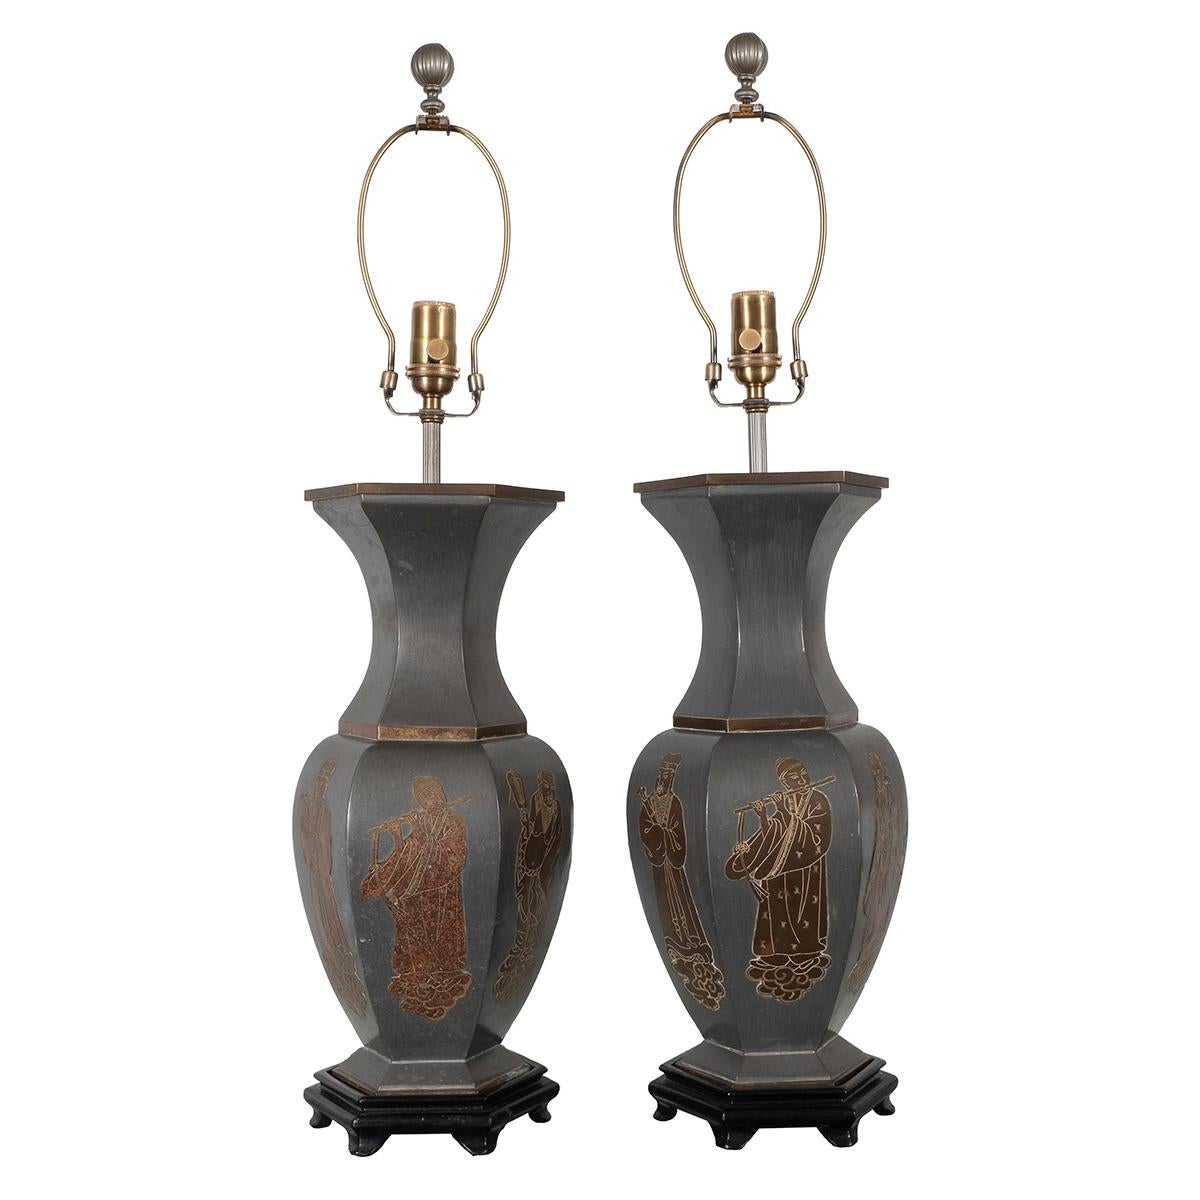 Pair of enameled metal chinoiserie motif table lamps with painted wood bases in the style of James Mont.